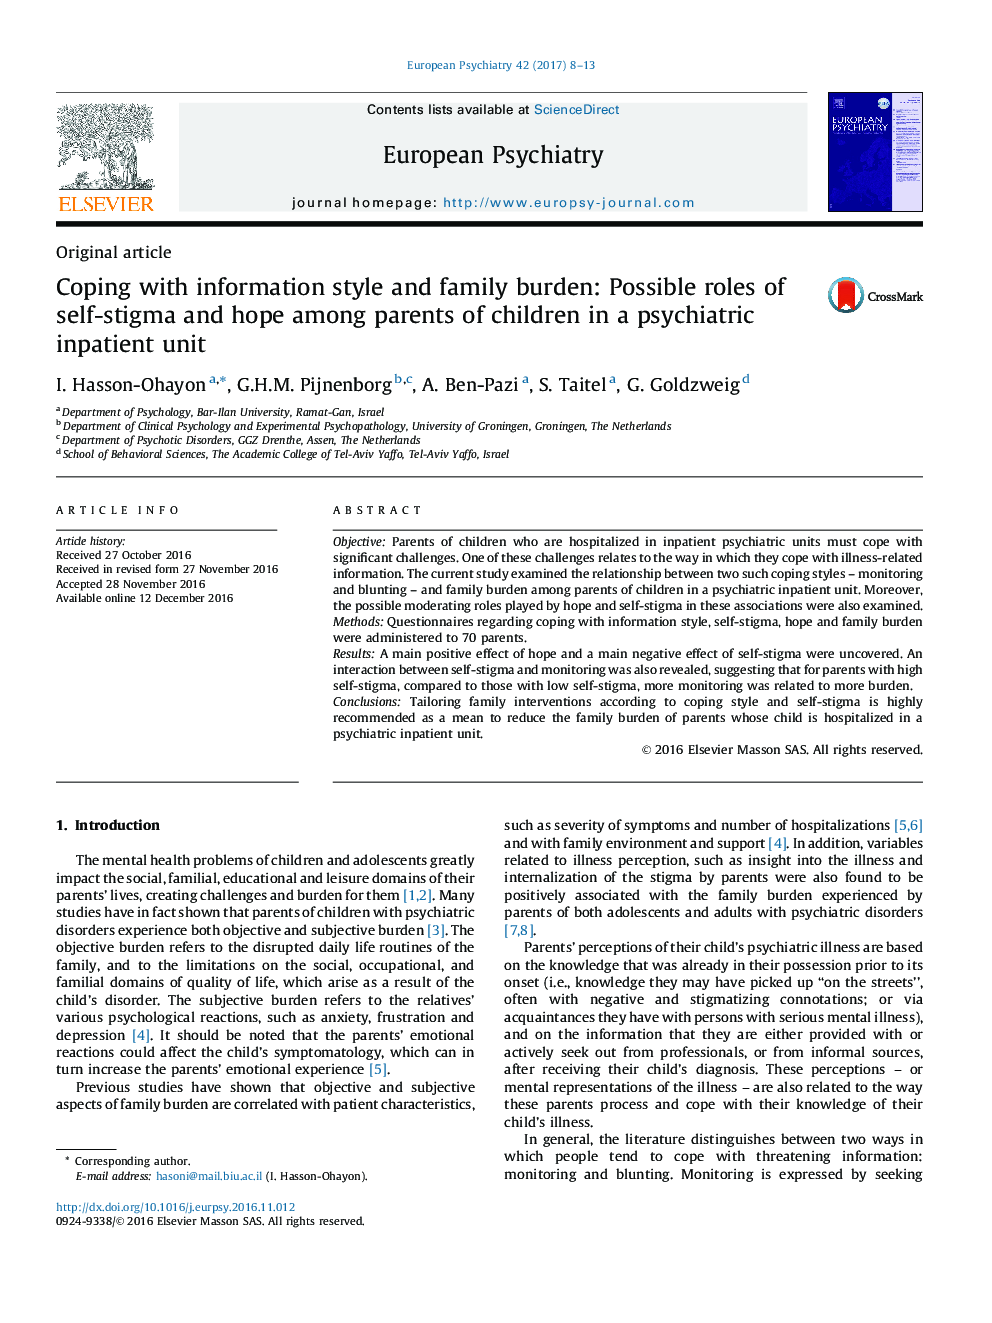 Original articleCoping with information style and family burden: Possible roles of self-stigma and hope among parents of children in a psychiatric inpatient unit